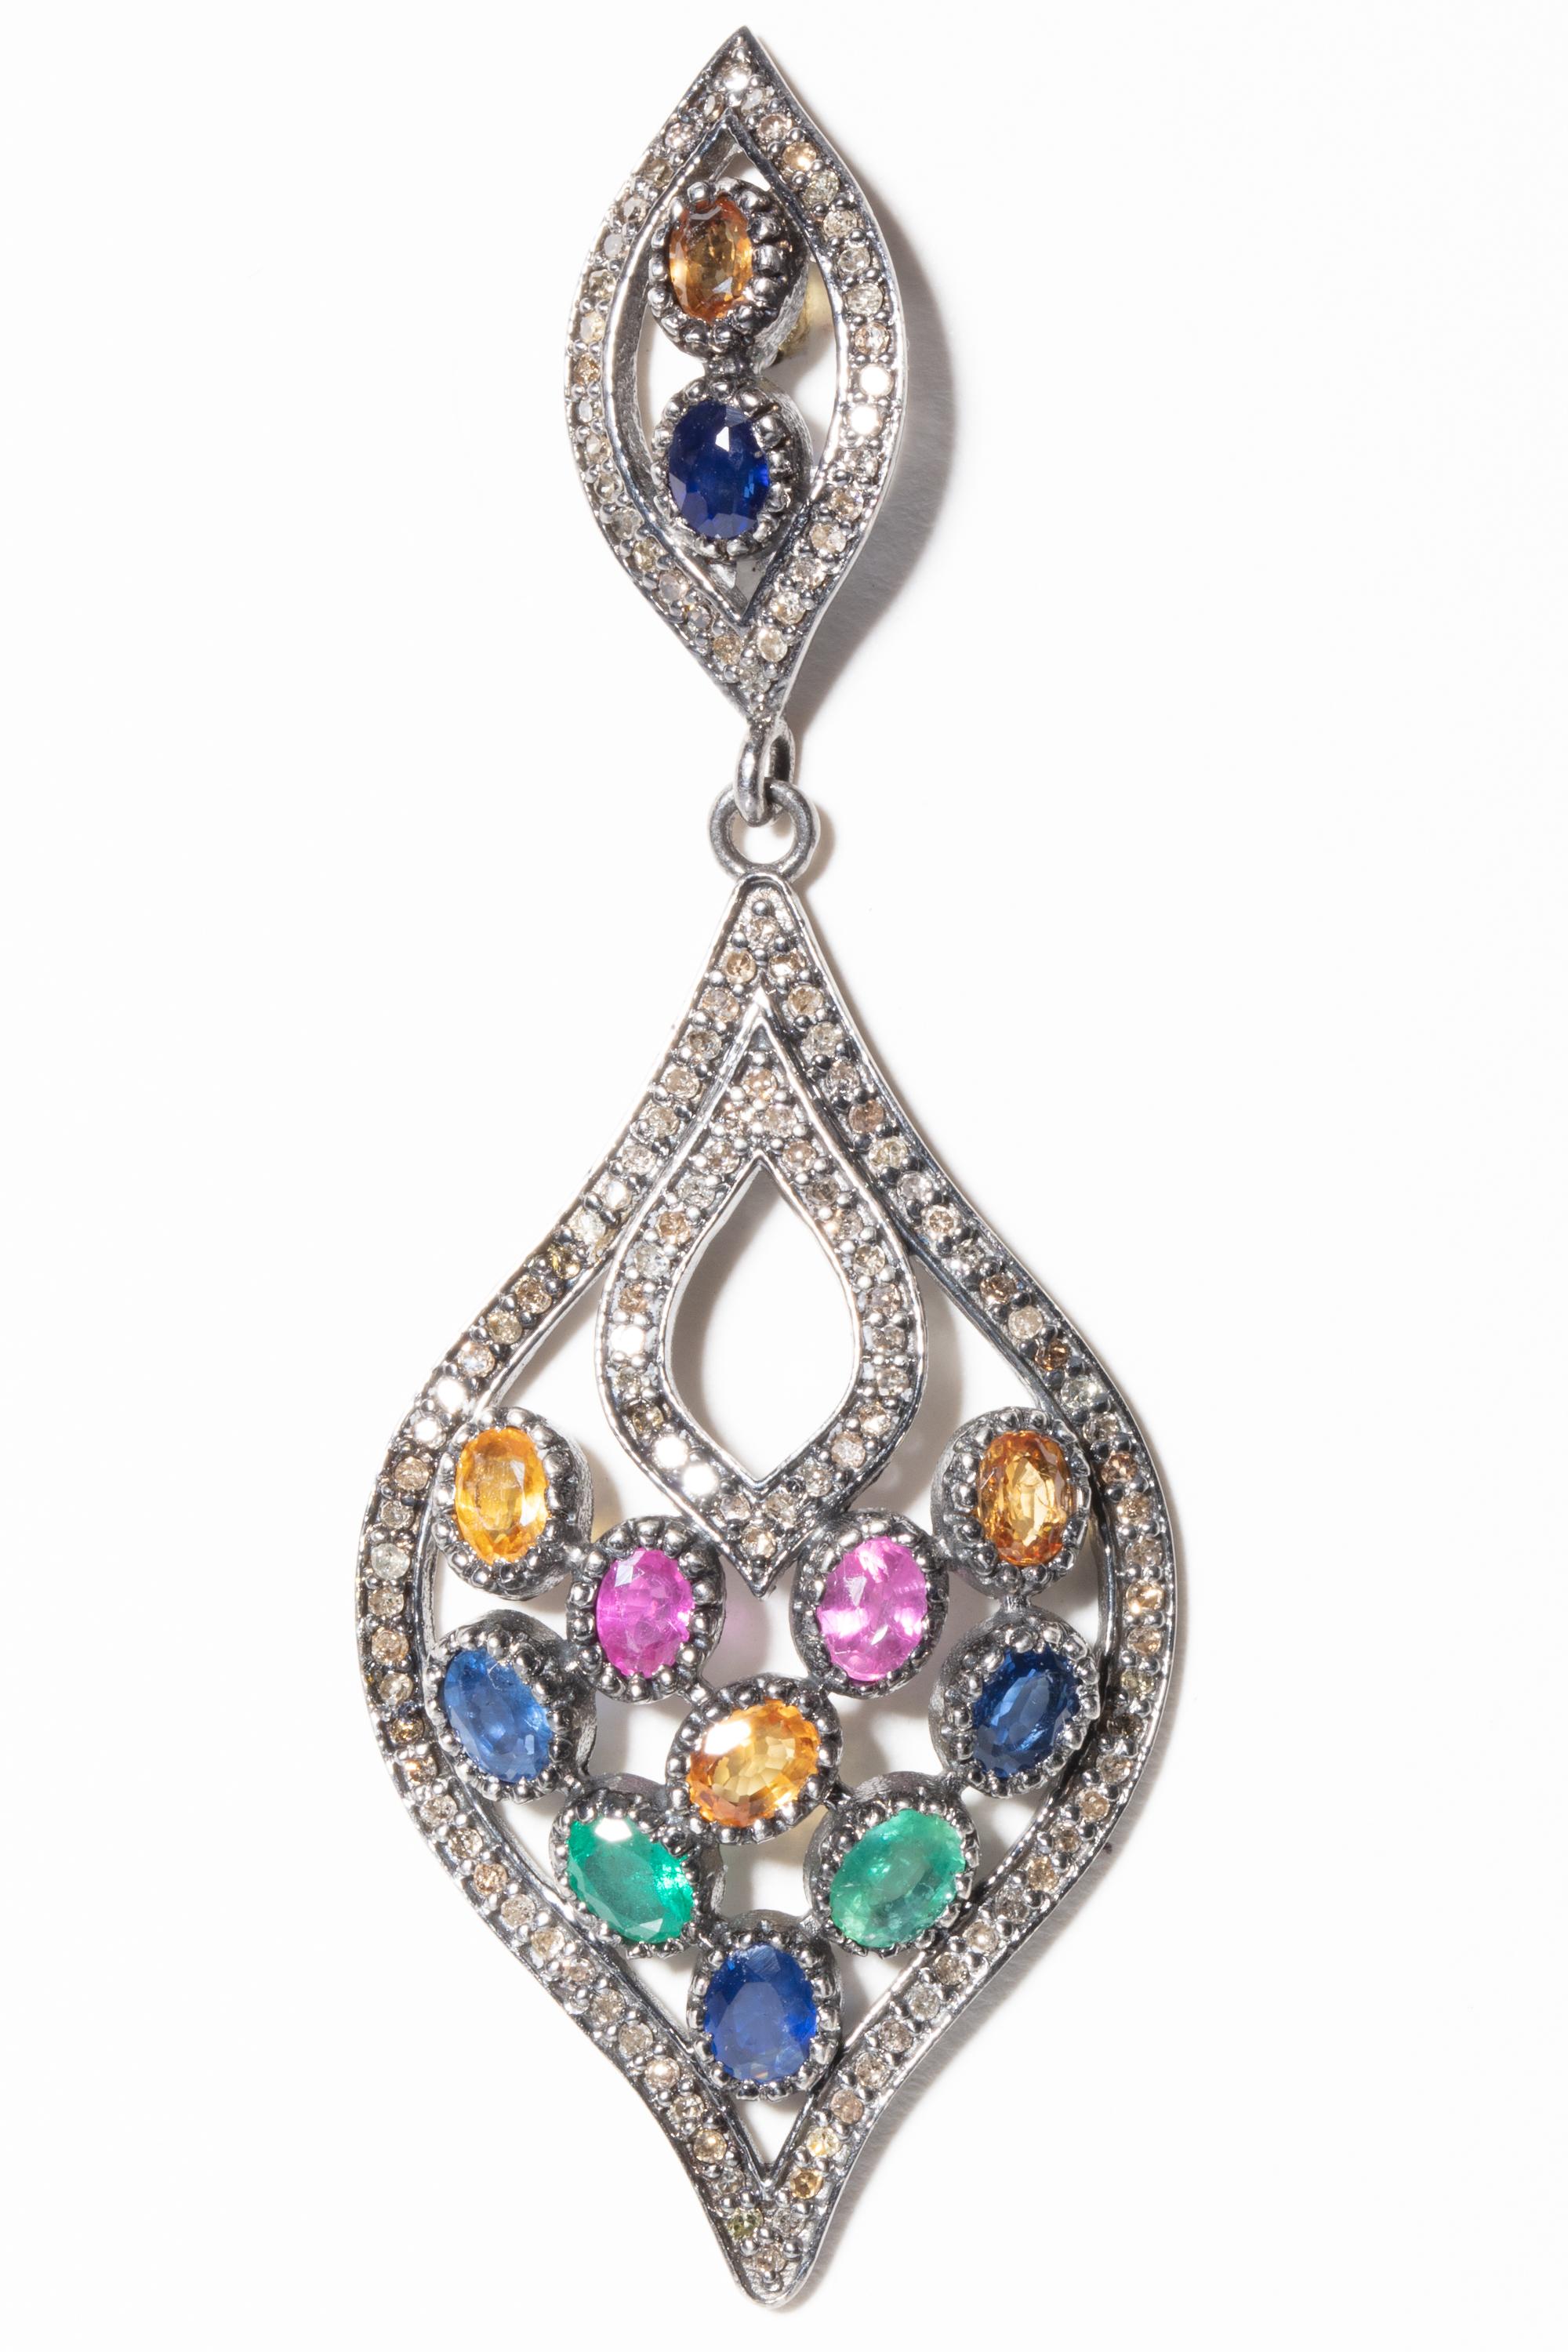 A mosaic of oval, faceted, colored (blue, pink, yellow and green) sapphires in a bezel setting bordered in pave`-set diamonds in sterling silver.  Carat weight of sapphires is 5.09 and diamonds are 1.80 carats.  For pierced ears.